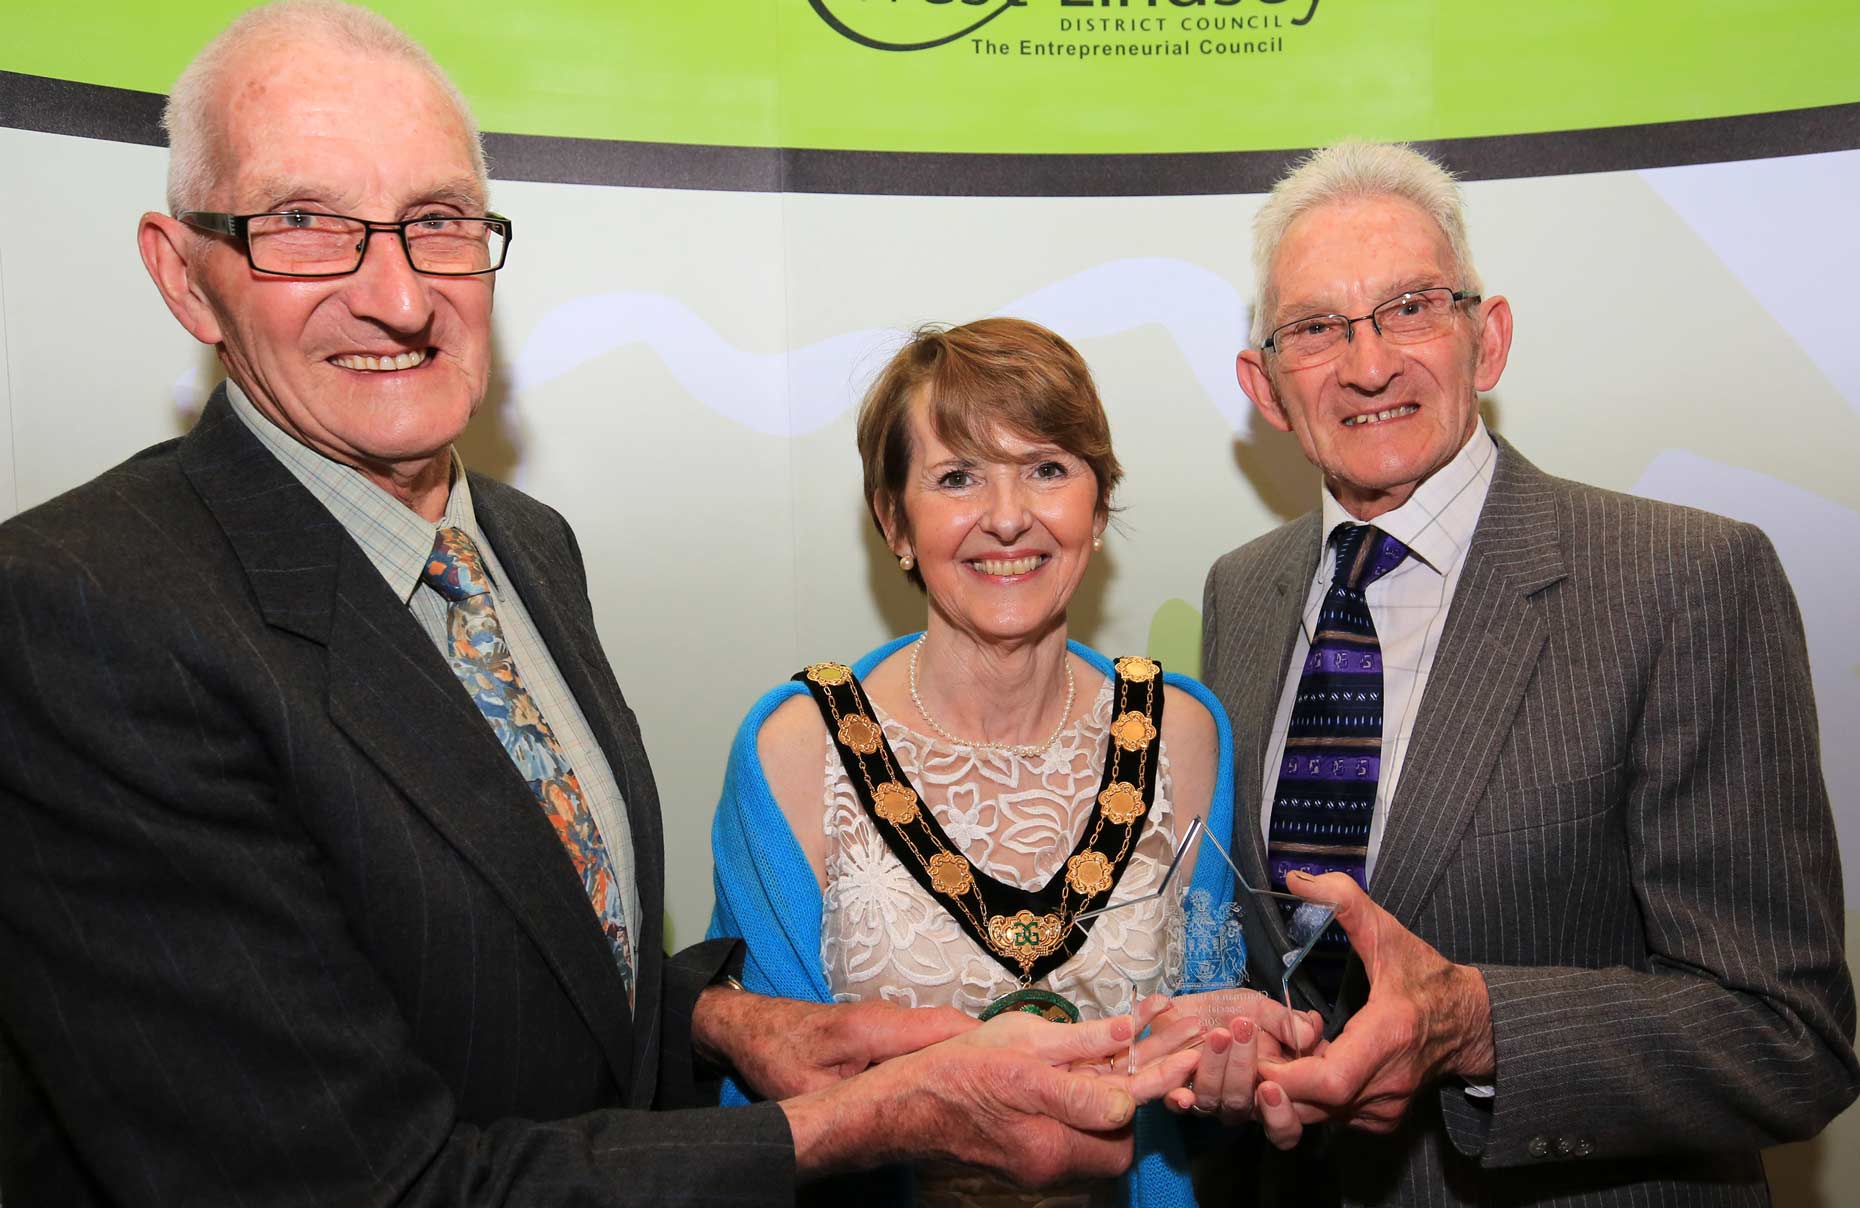 Local heroes celebrated at community awards ceremony